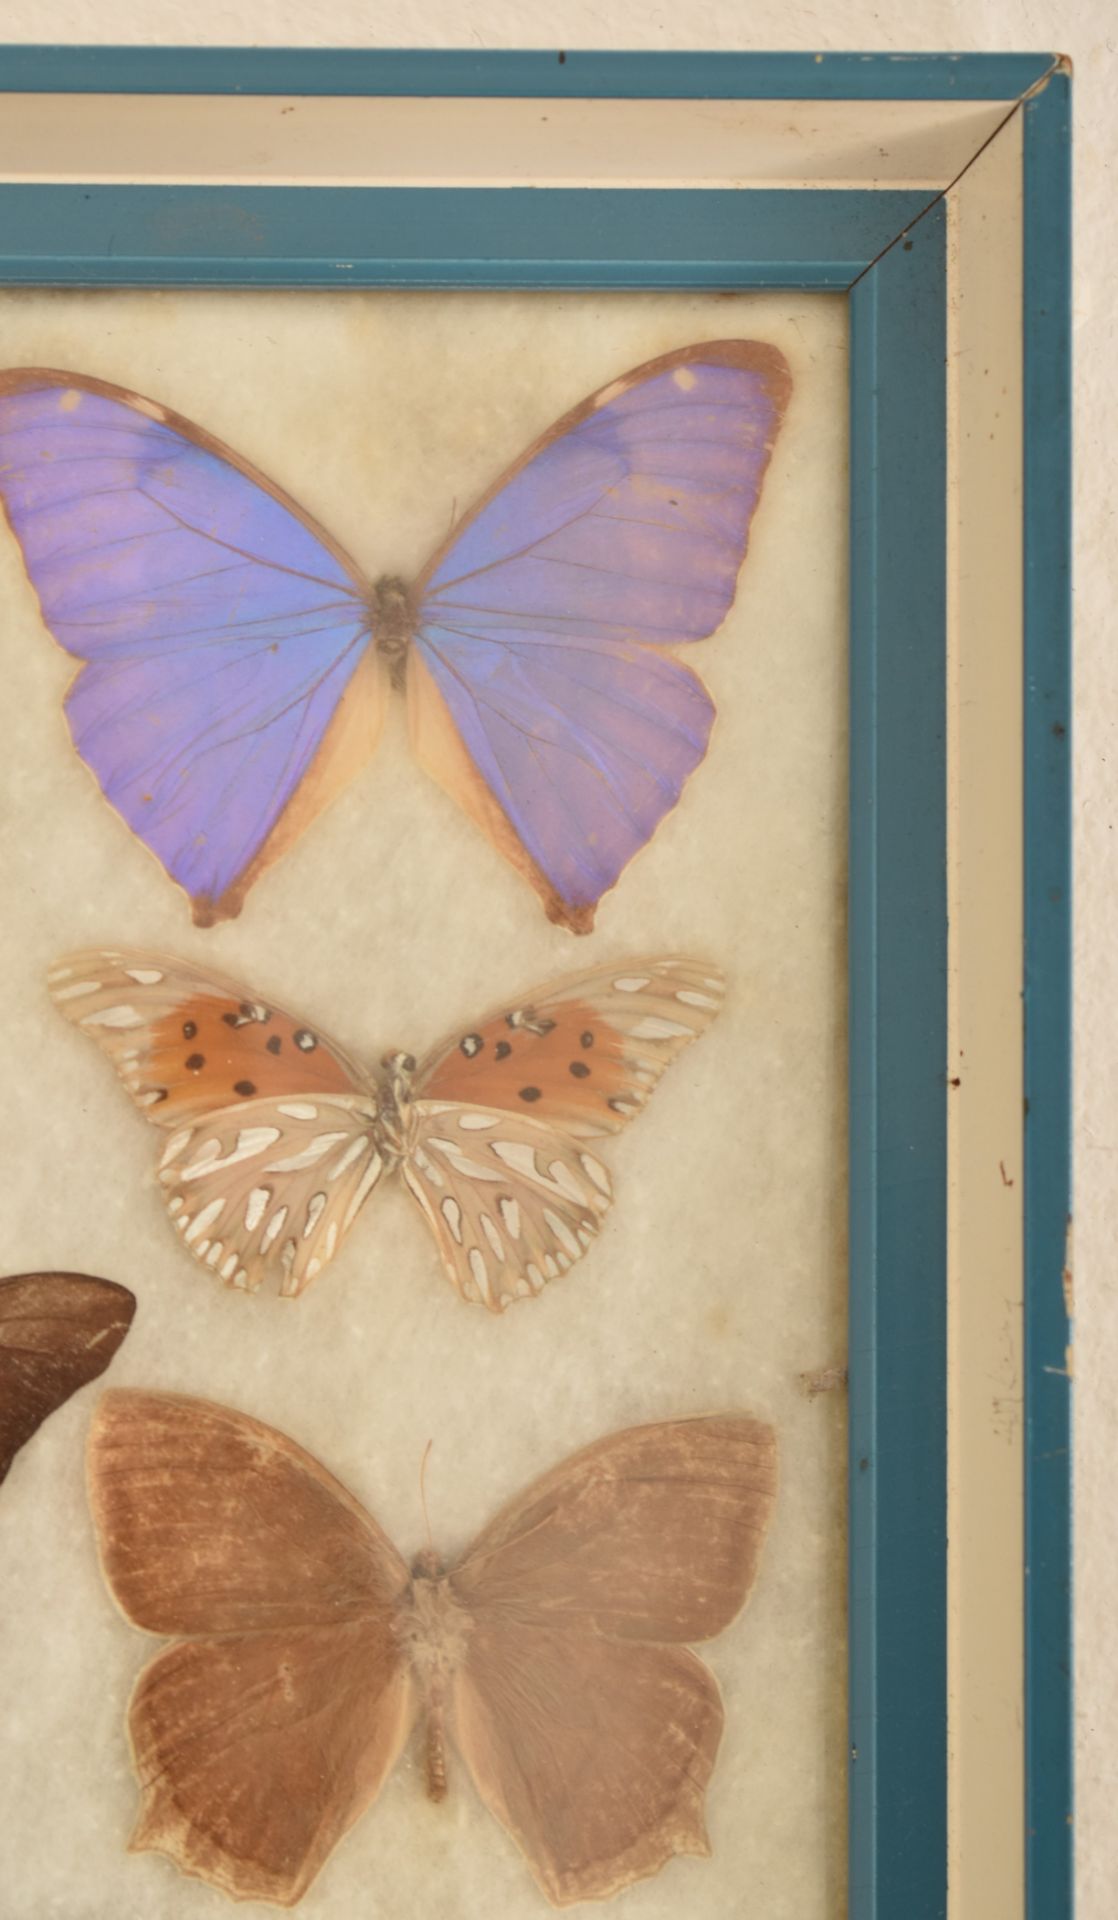 ENTOMOLOGY - COLLECTION OF TAXIDERMY BUTTERFLY SPECIMENS - Image 3 of 6